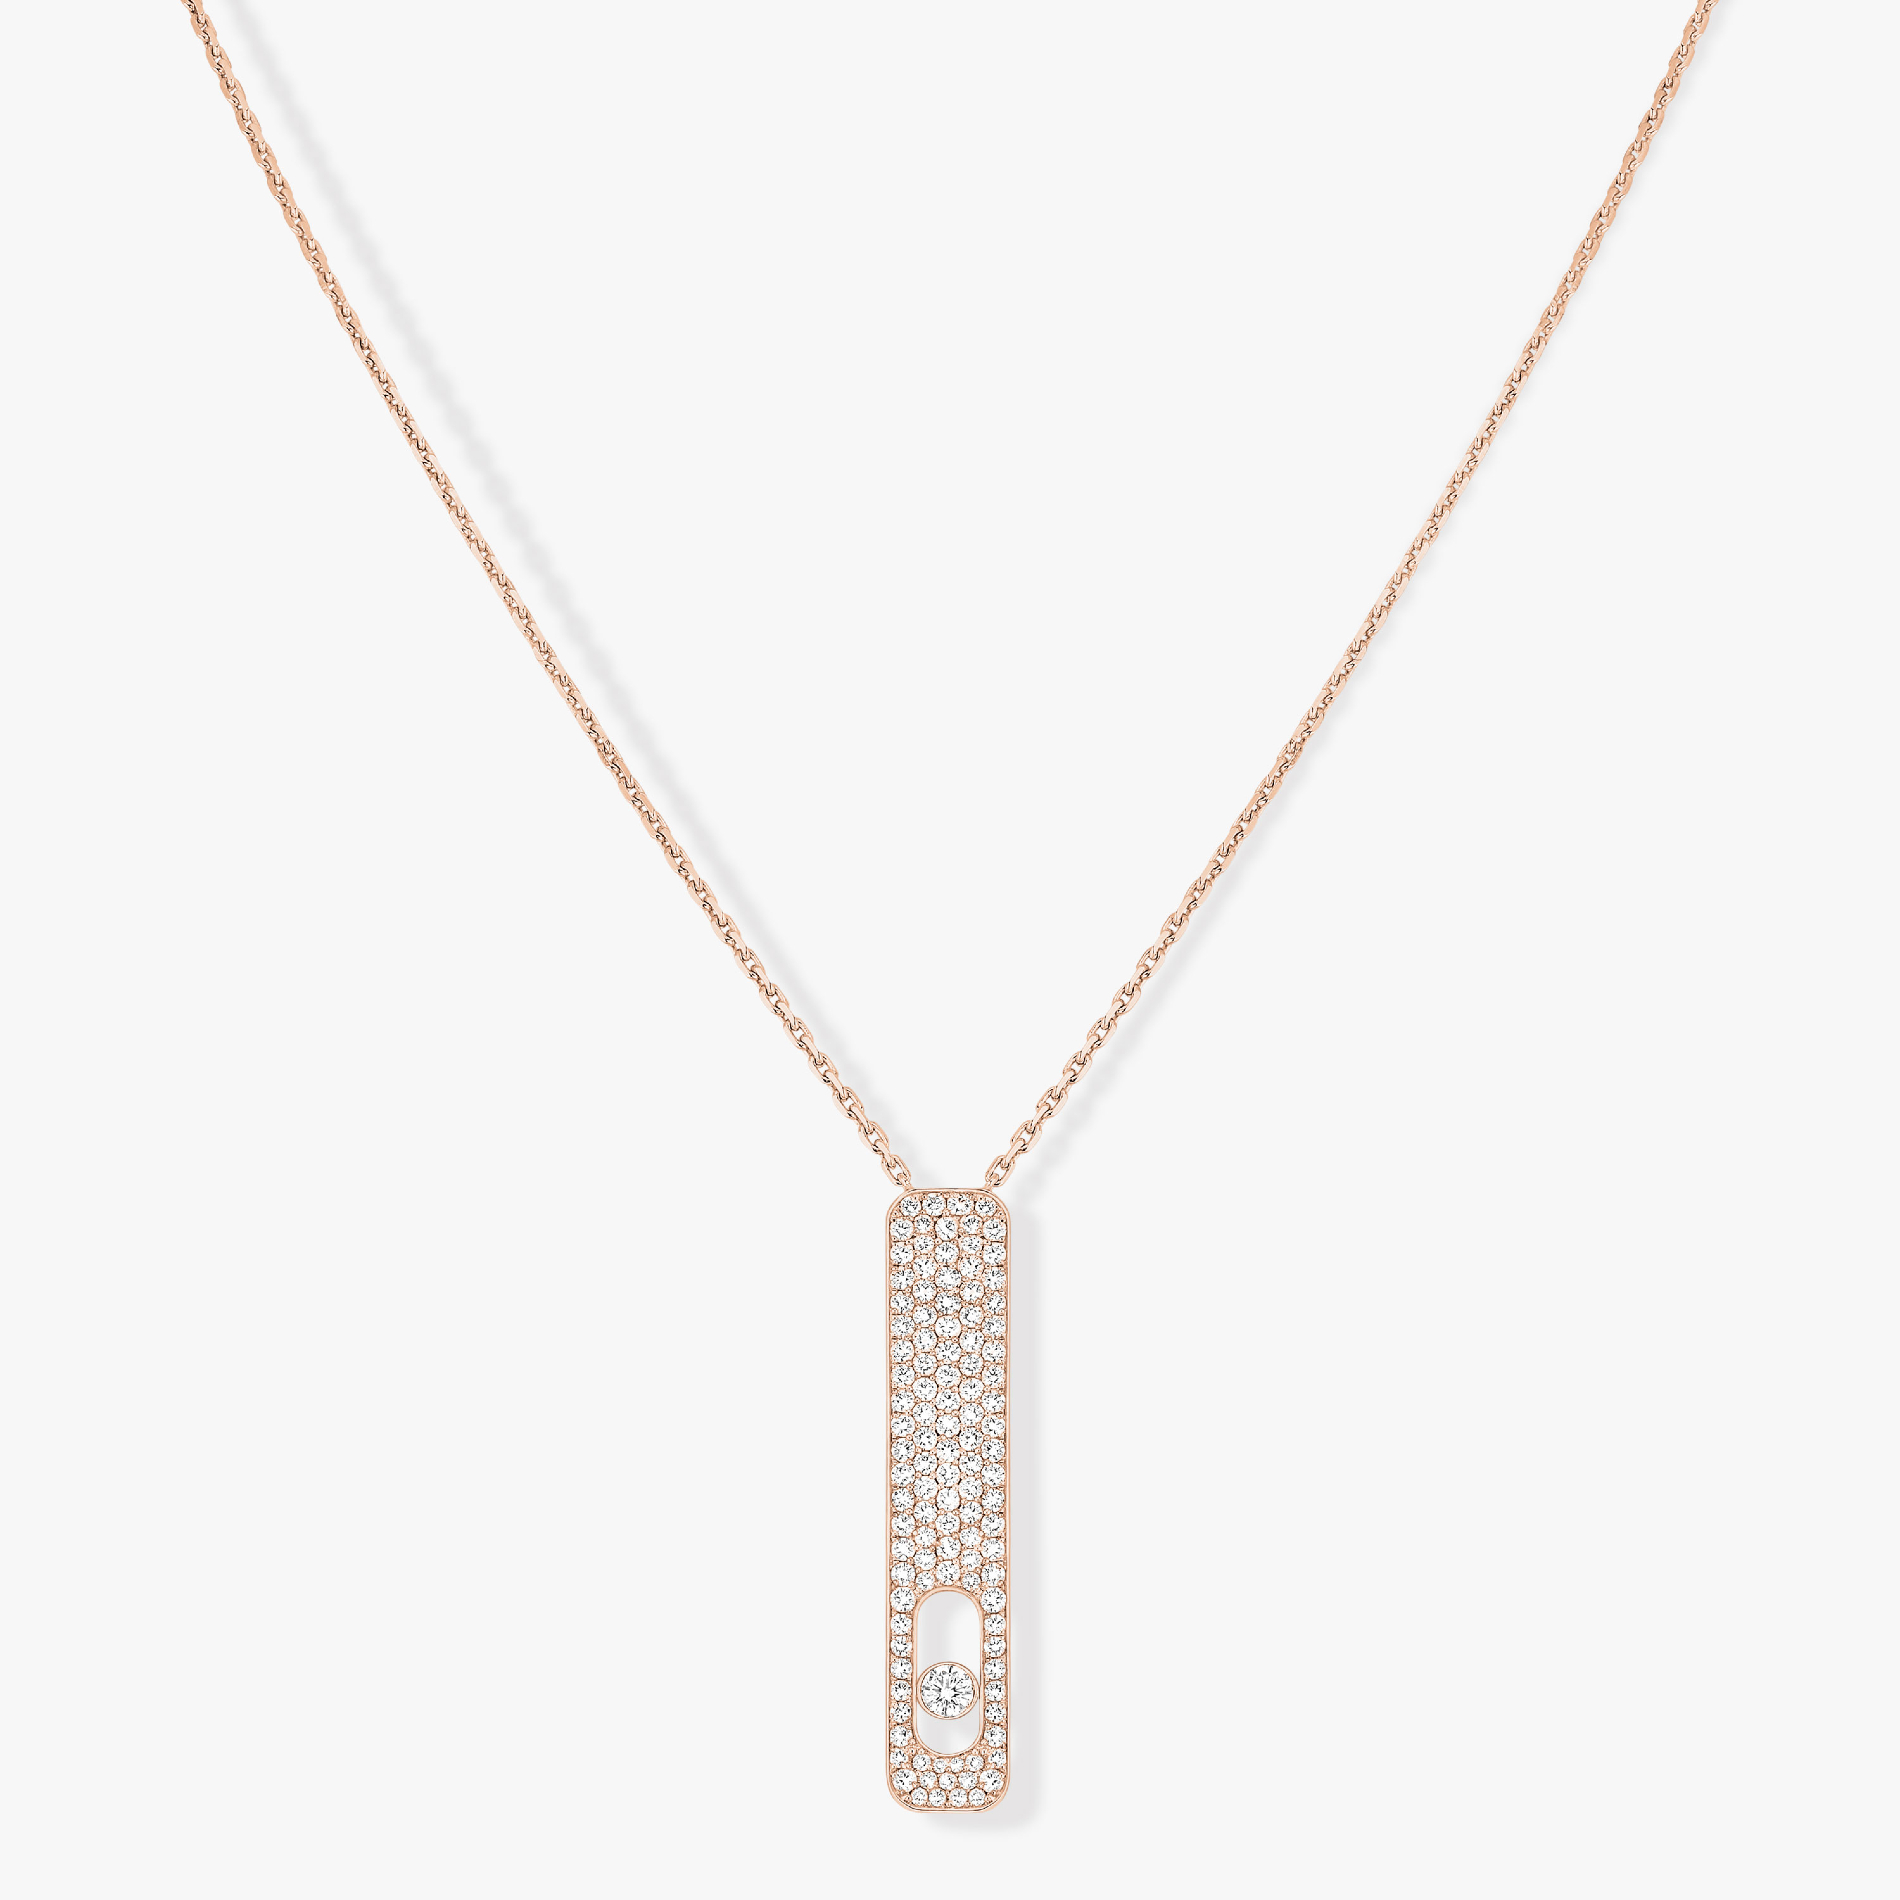 My First Diamond LM Pavé Pink Gold For Her Diamond Necklace 10131-PG